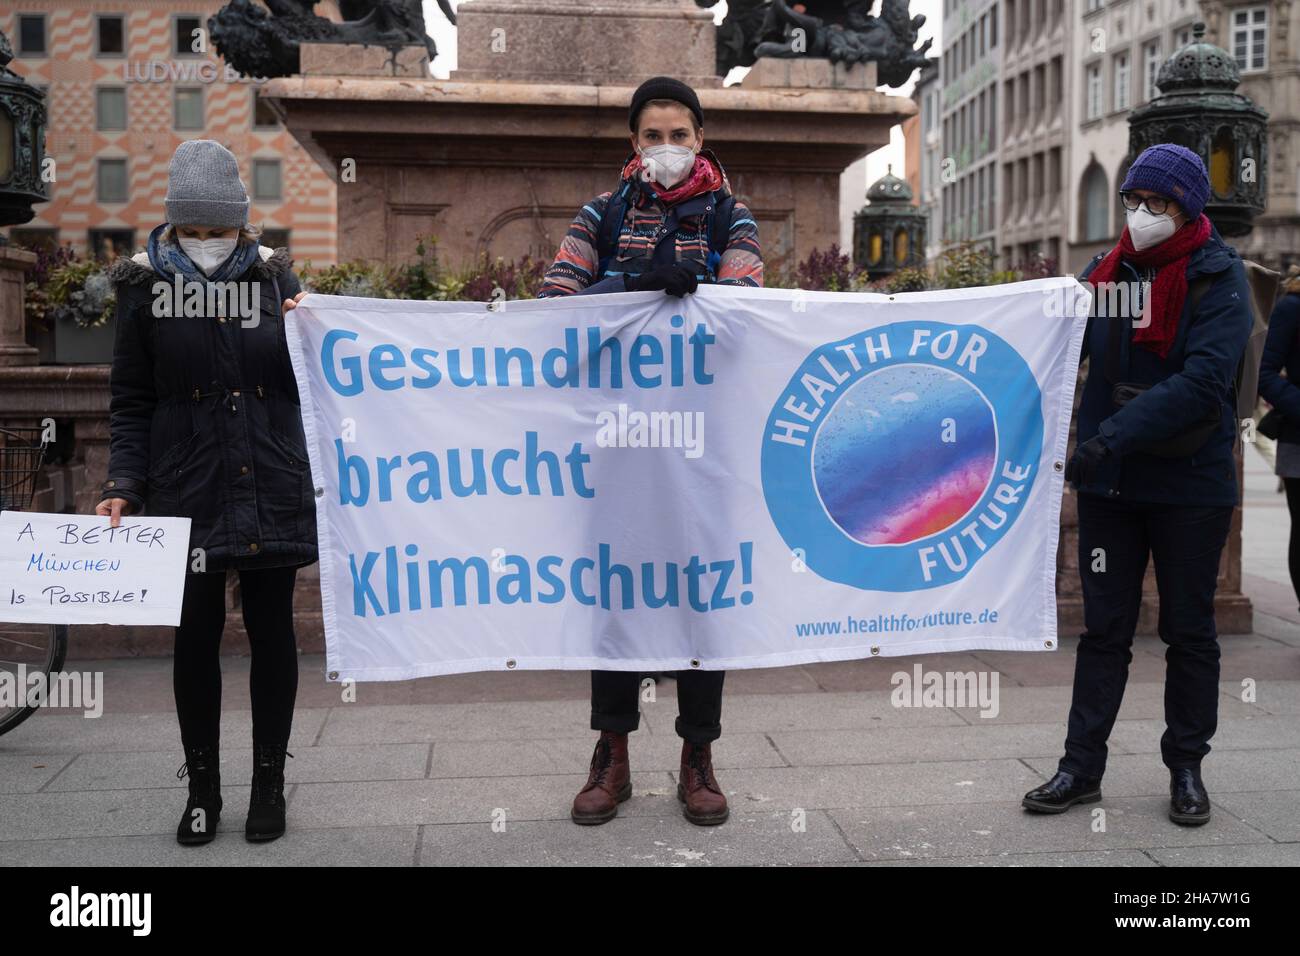 Participants with banner 'Health needs climate protection, Health for Future'.On December 10, 2021, a climate strike organized by FridaysForFuture took place in Munich, as it does every Friday, with more than 150 participants loudly demonstrating for compliance with the 1.5 degree target. The demonstrators also demonstrated that Munich should be climate neutral by 2035. (Photo by Alexander Pohl/Sipa USA) Credit: Sipa USA/Alamy Live News Stock Photo